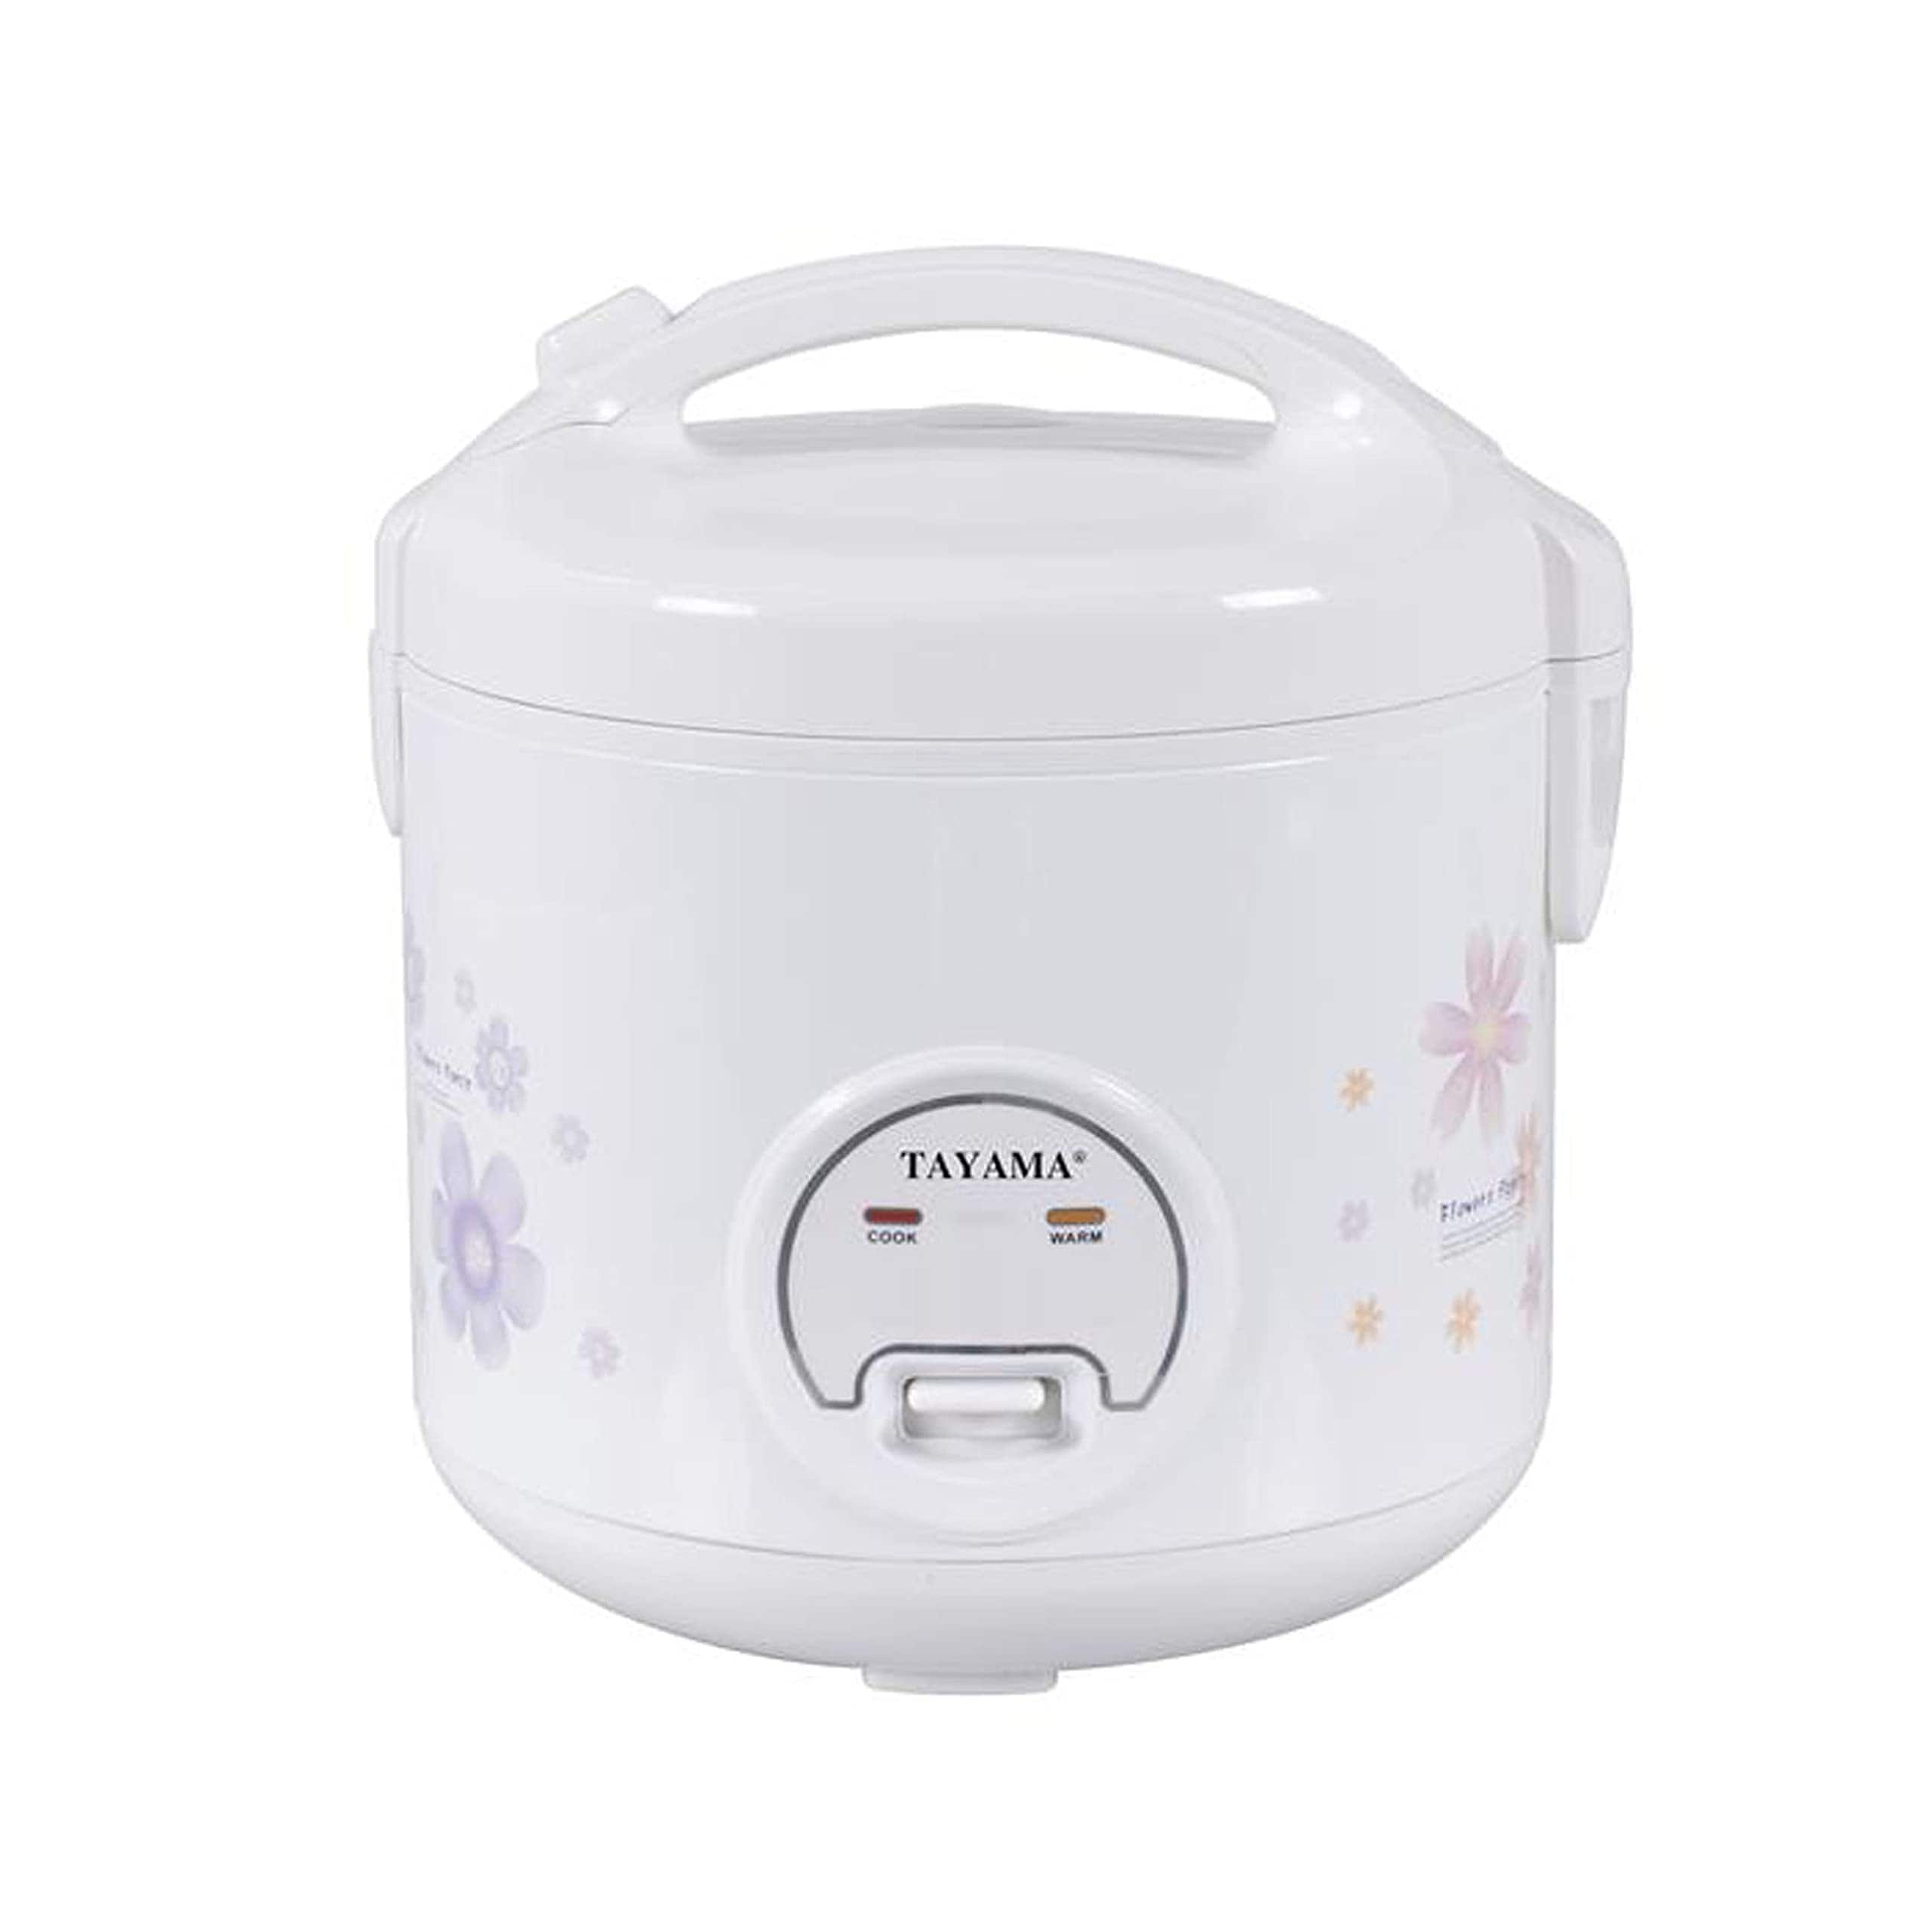 https://ak1.ostkcdn.com/images/products/is/images/direct/3eeba331debbd2dc9aaa79e9ff03b56c491e54a5/Automatic-Rice-Cooker-%26-Food-Steamer-8-Measuring-Cup%2C-White.jpg